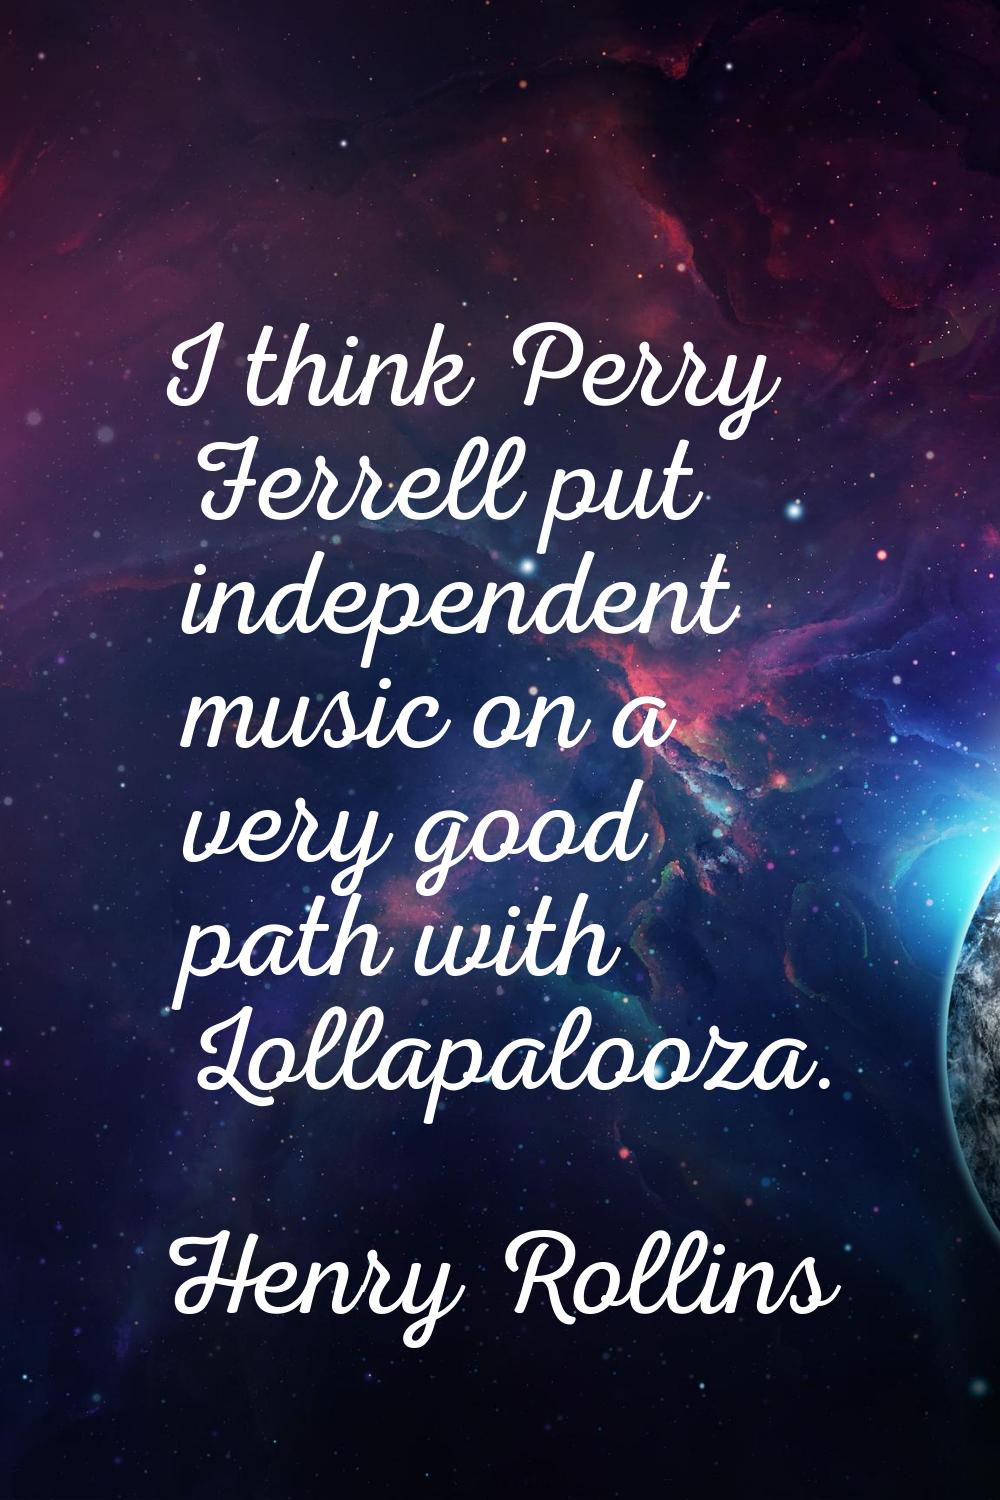 I think Perry Ferrell put independent music on a very good path with Lollapalooza.